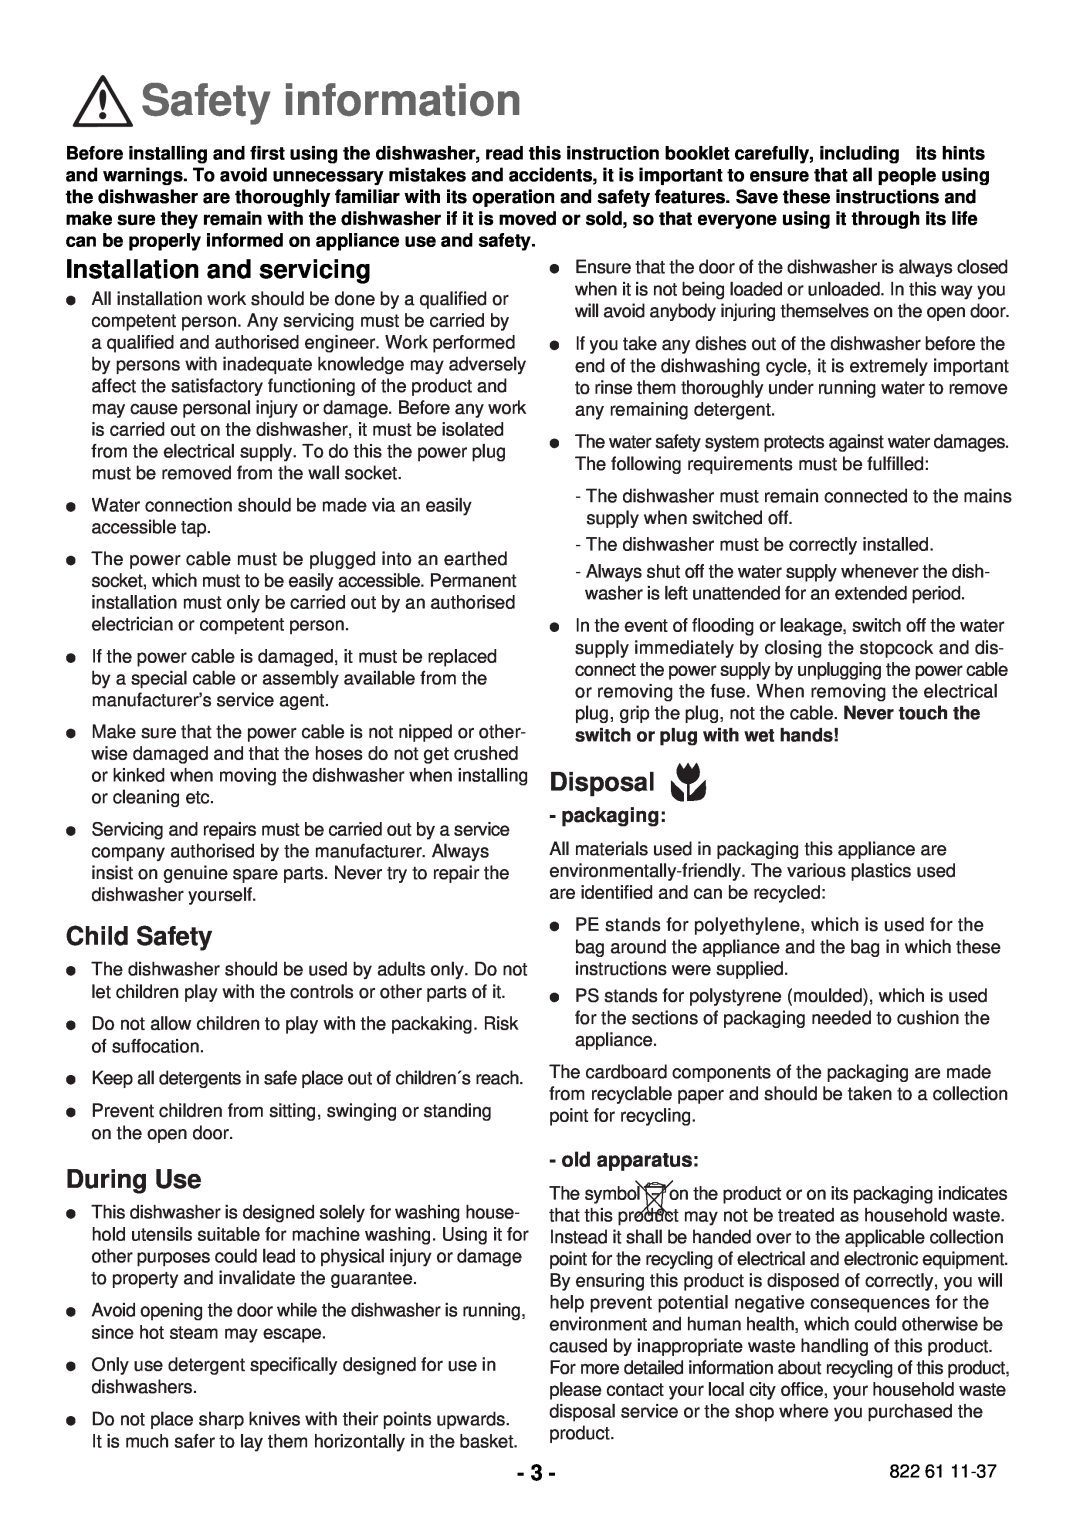 Electrolux ESL 2435 manual Safety information, Installation and servicing, Child Safety, Disposal, During Use 